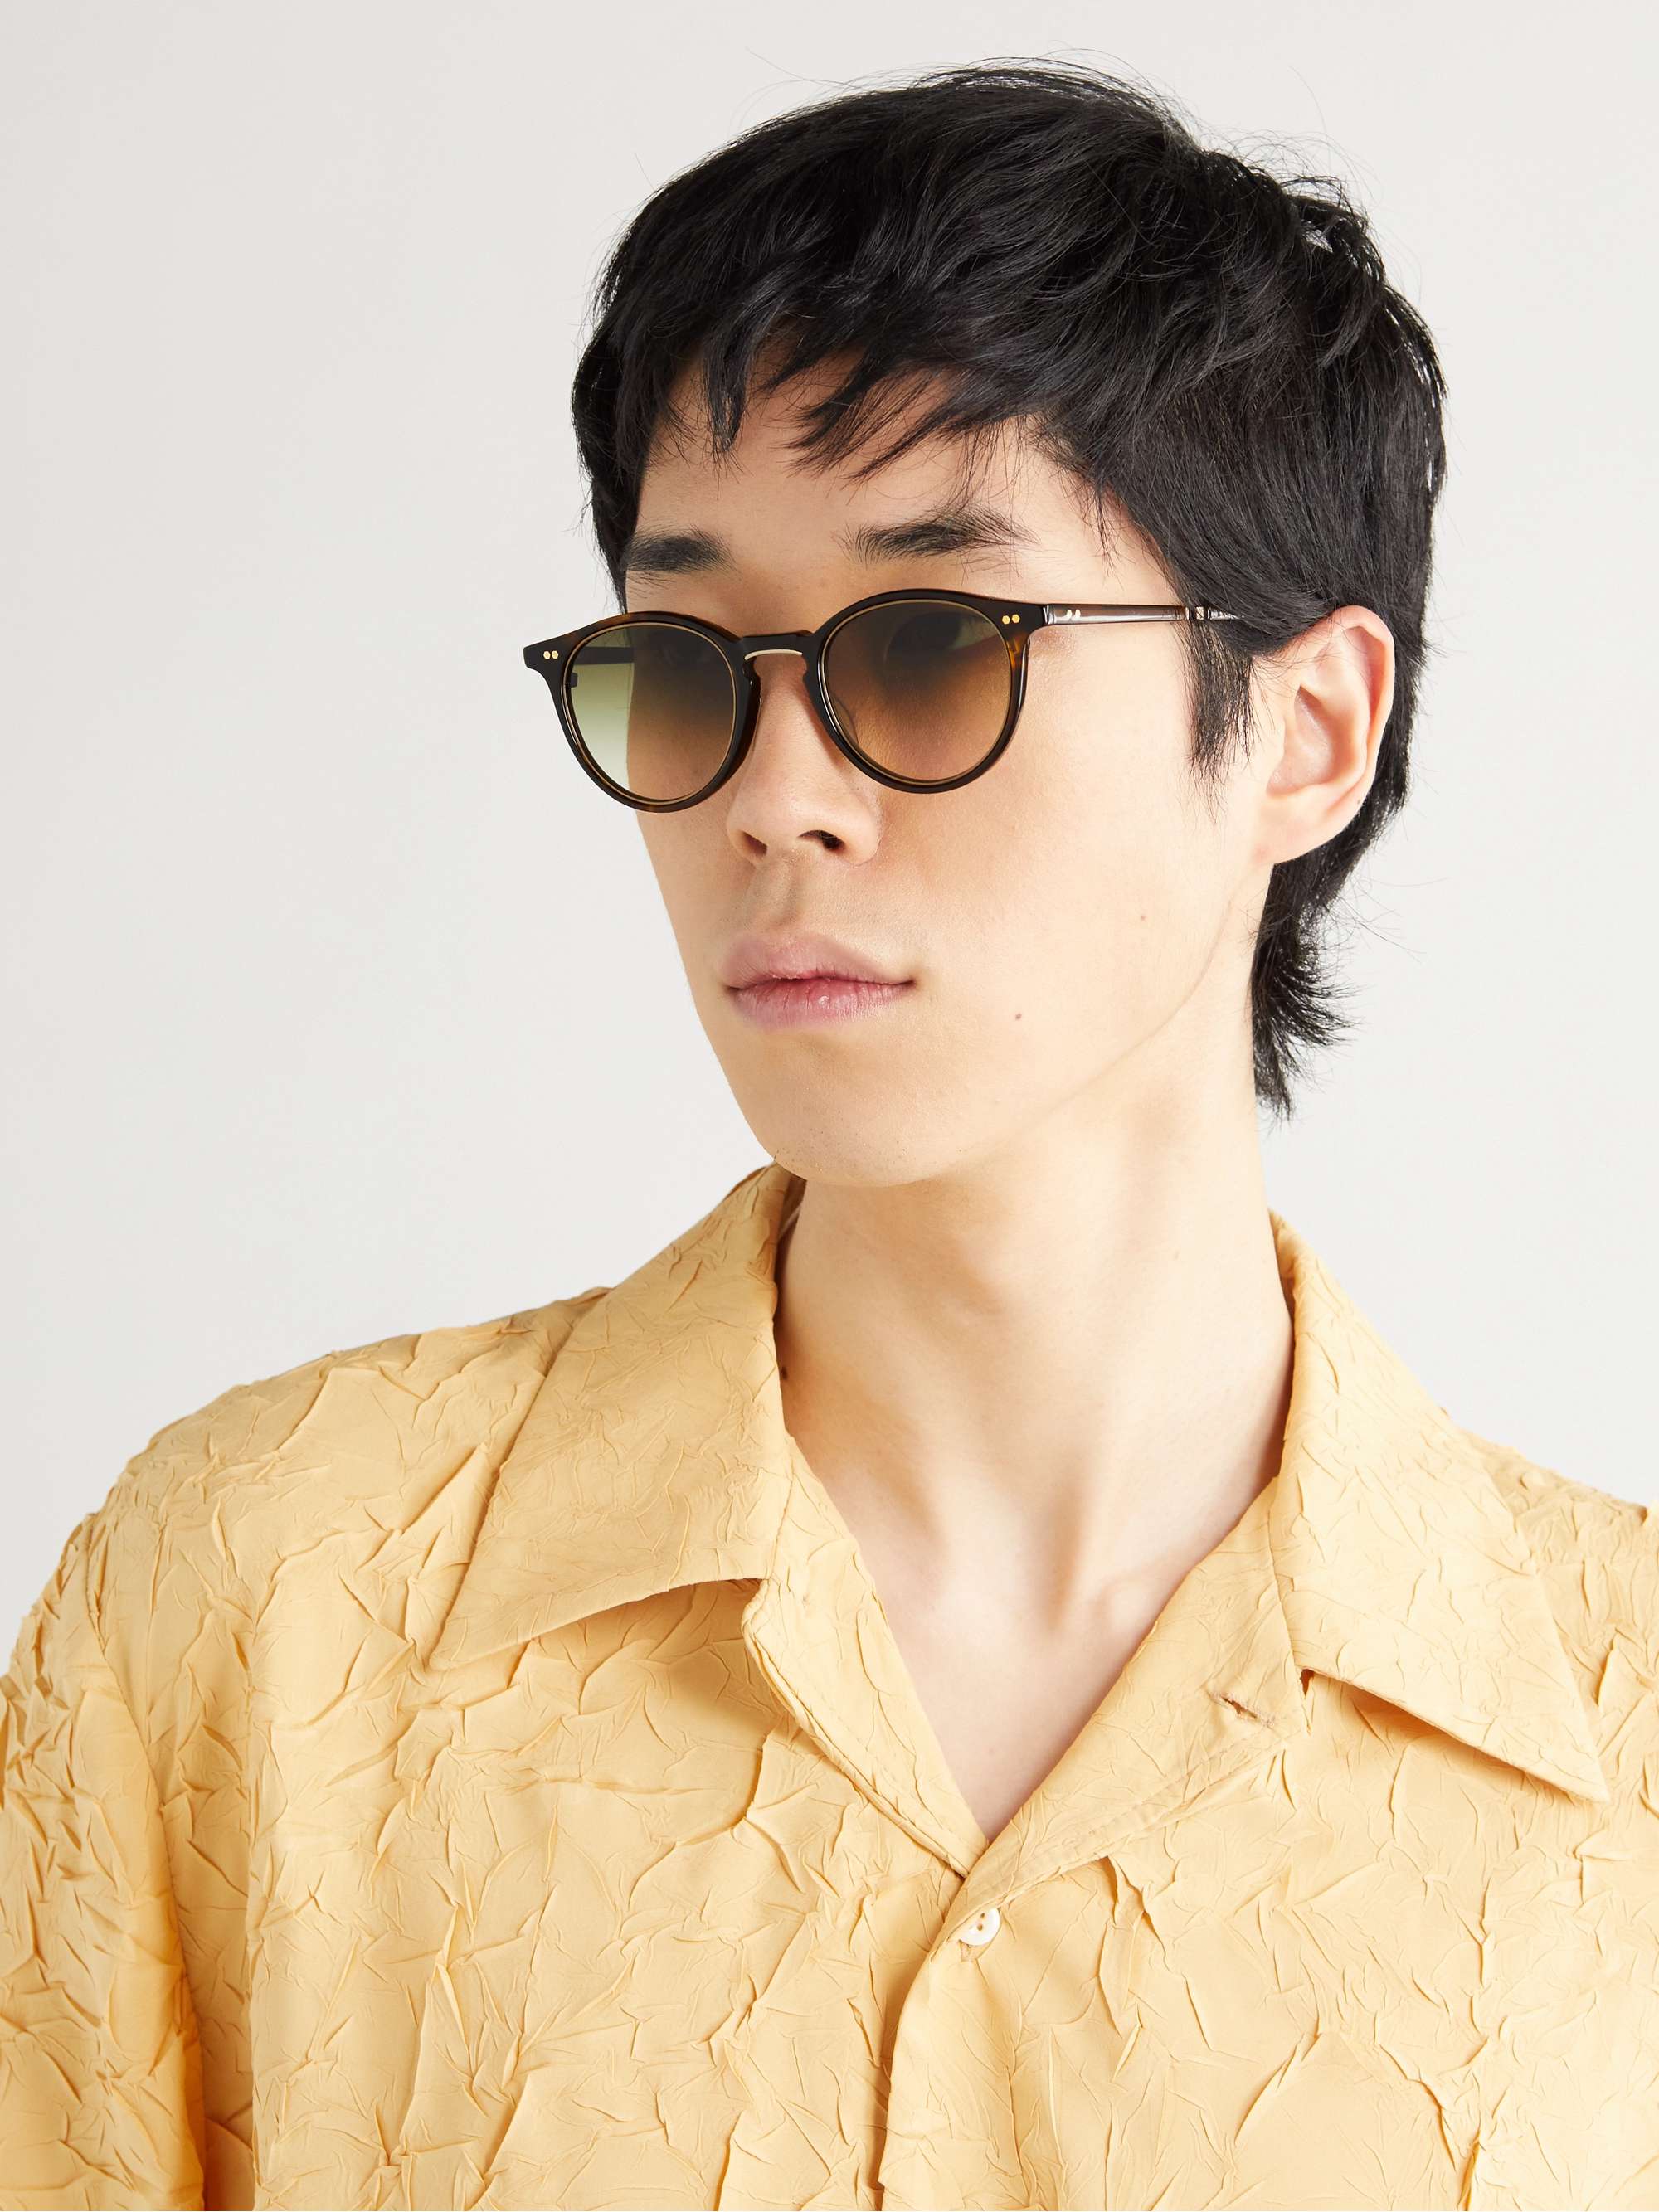 MR LEIGHT Marmont S Round-Frame Tortoiseshell Acetate and Gold-Tone Sunglasses